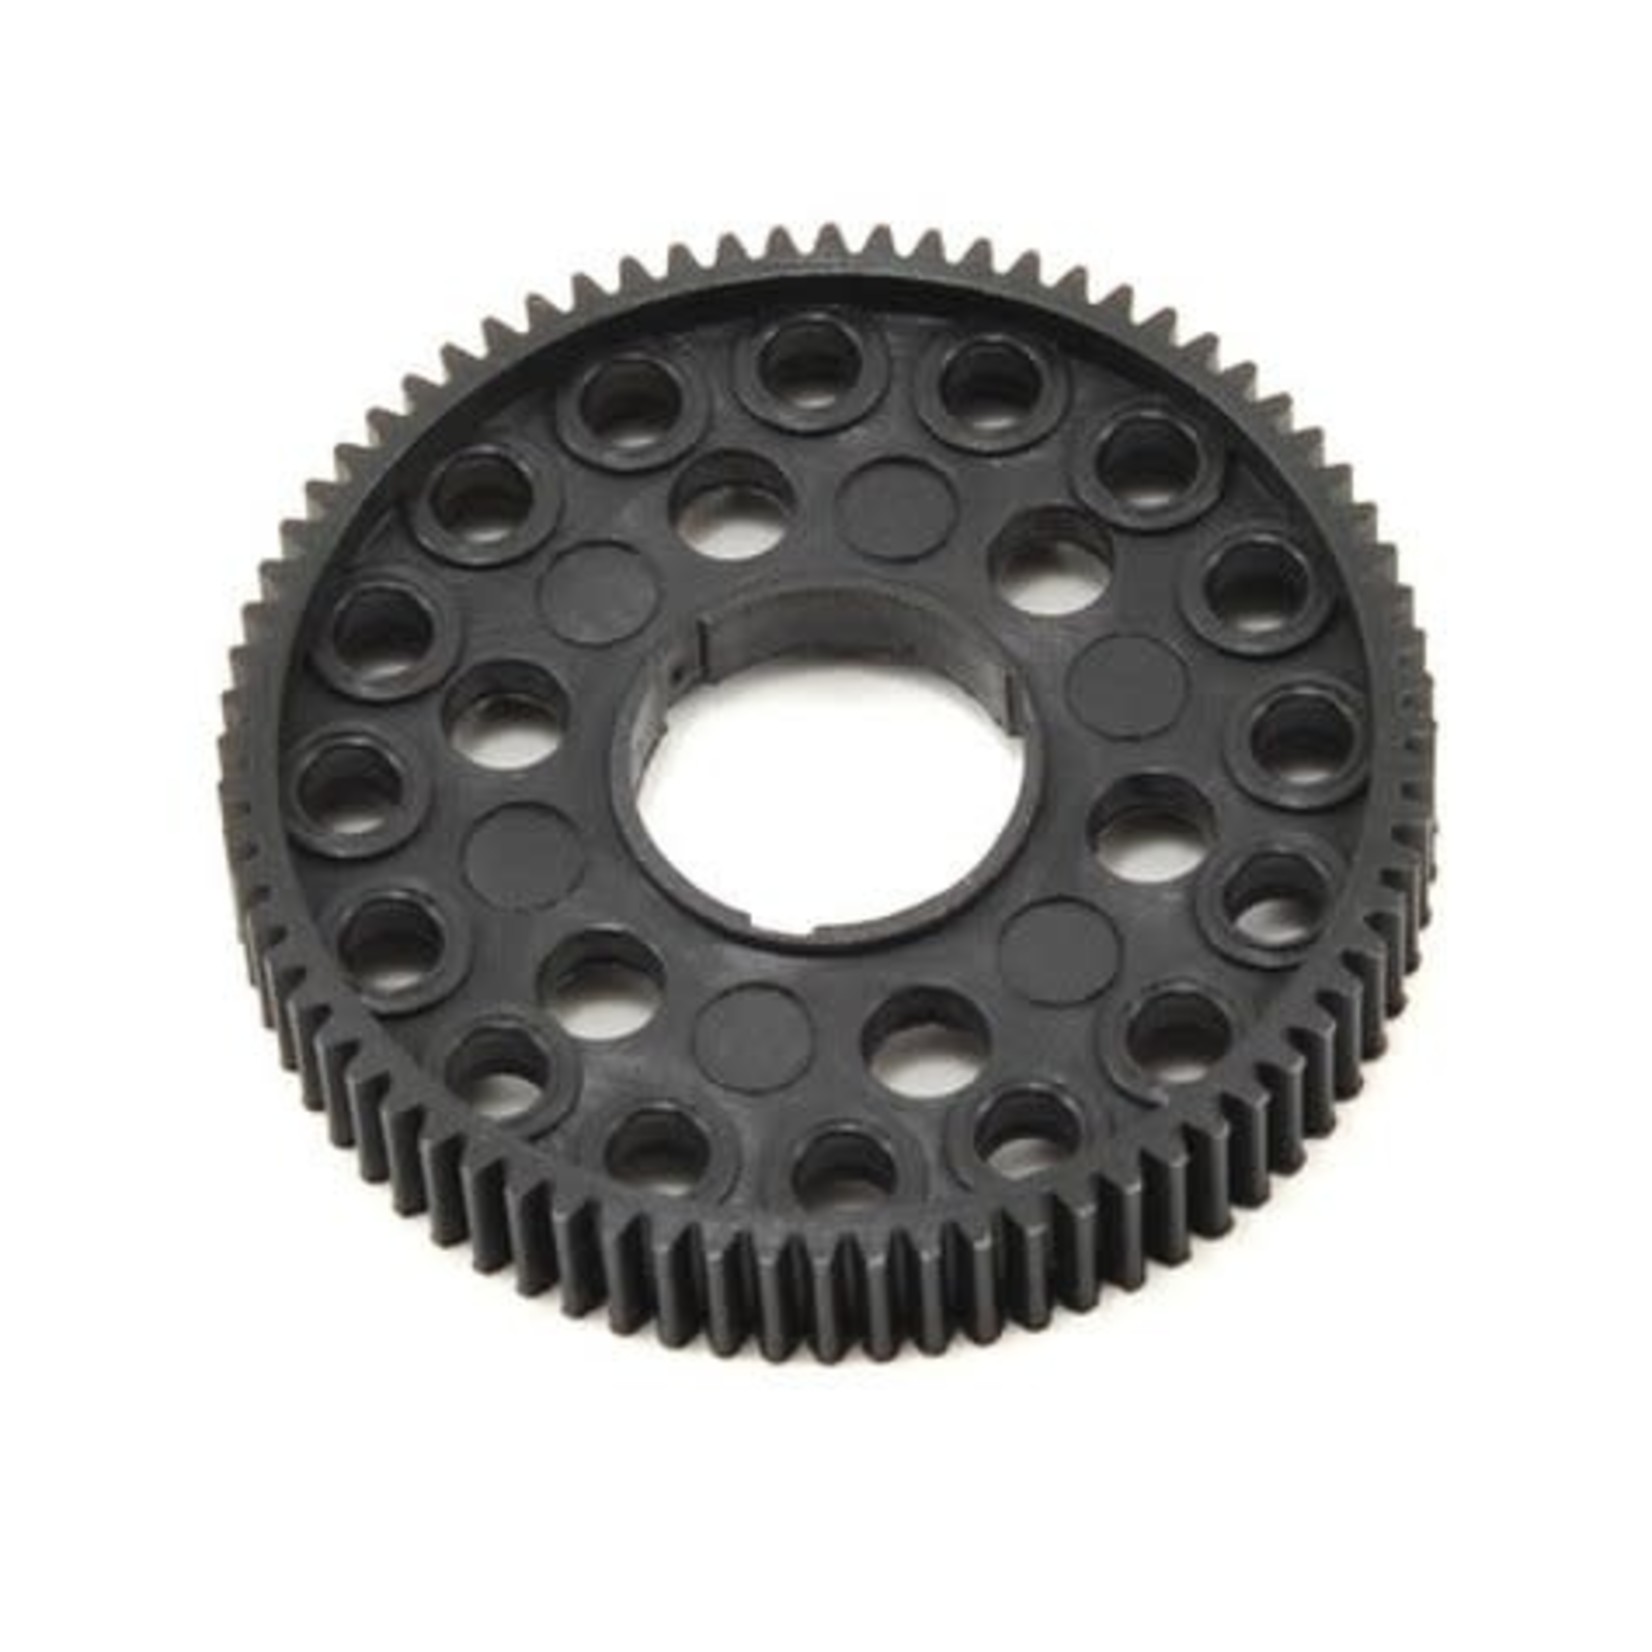 Calandra Racing Concepts (CRC) 64 Pitch Spur Gear 72Tooth